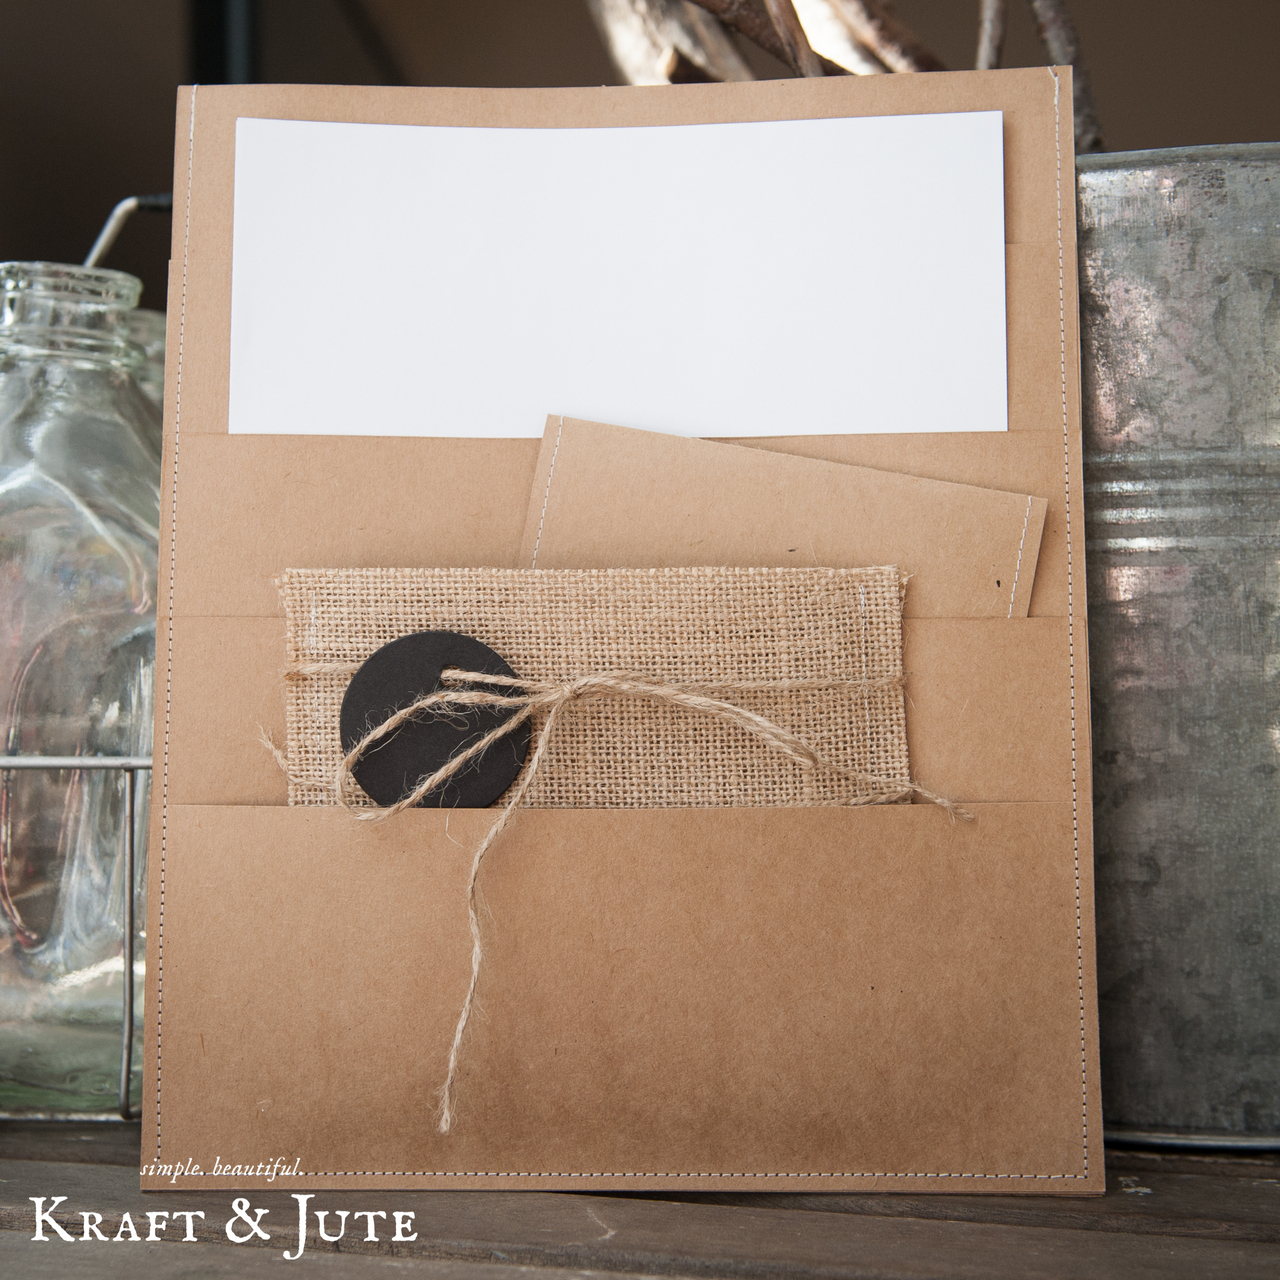 Guest Blog Post - Unique Packaging for Your Client Meeting!